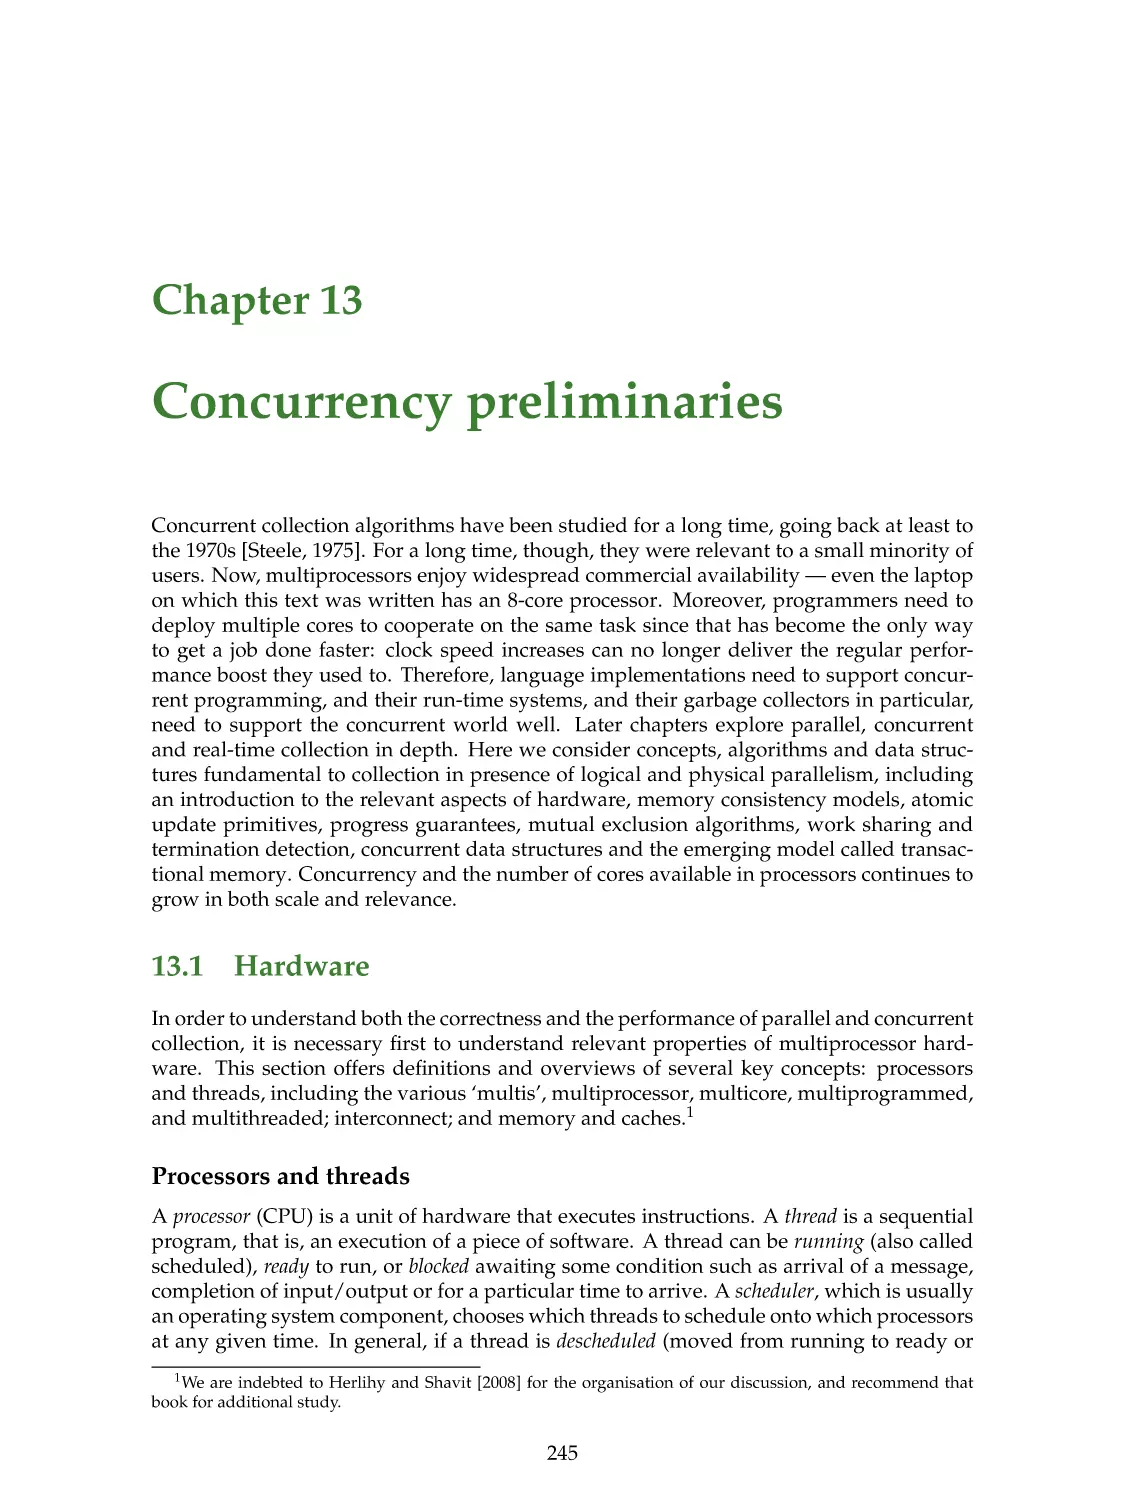 13. Concurrency preliminaries
13.1. Hardware
Processors and threads